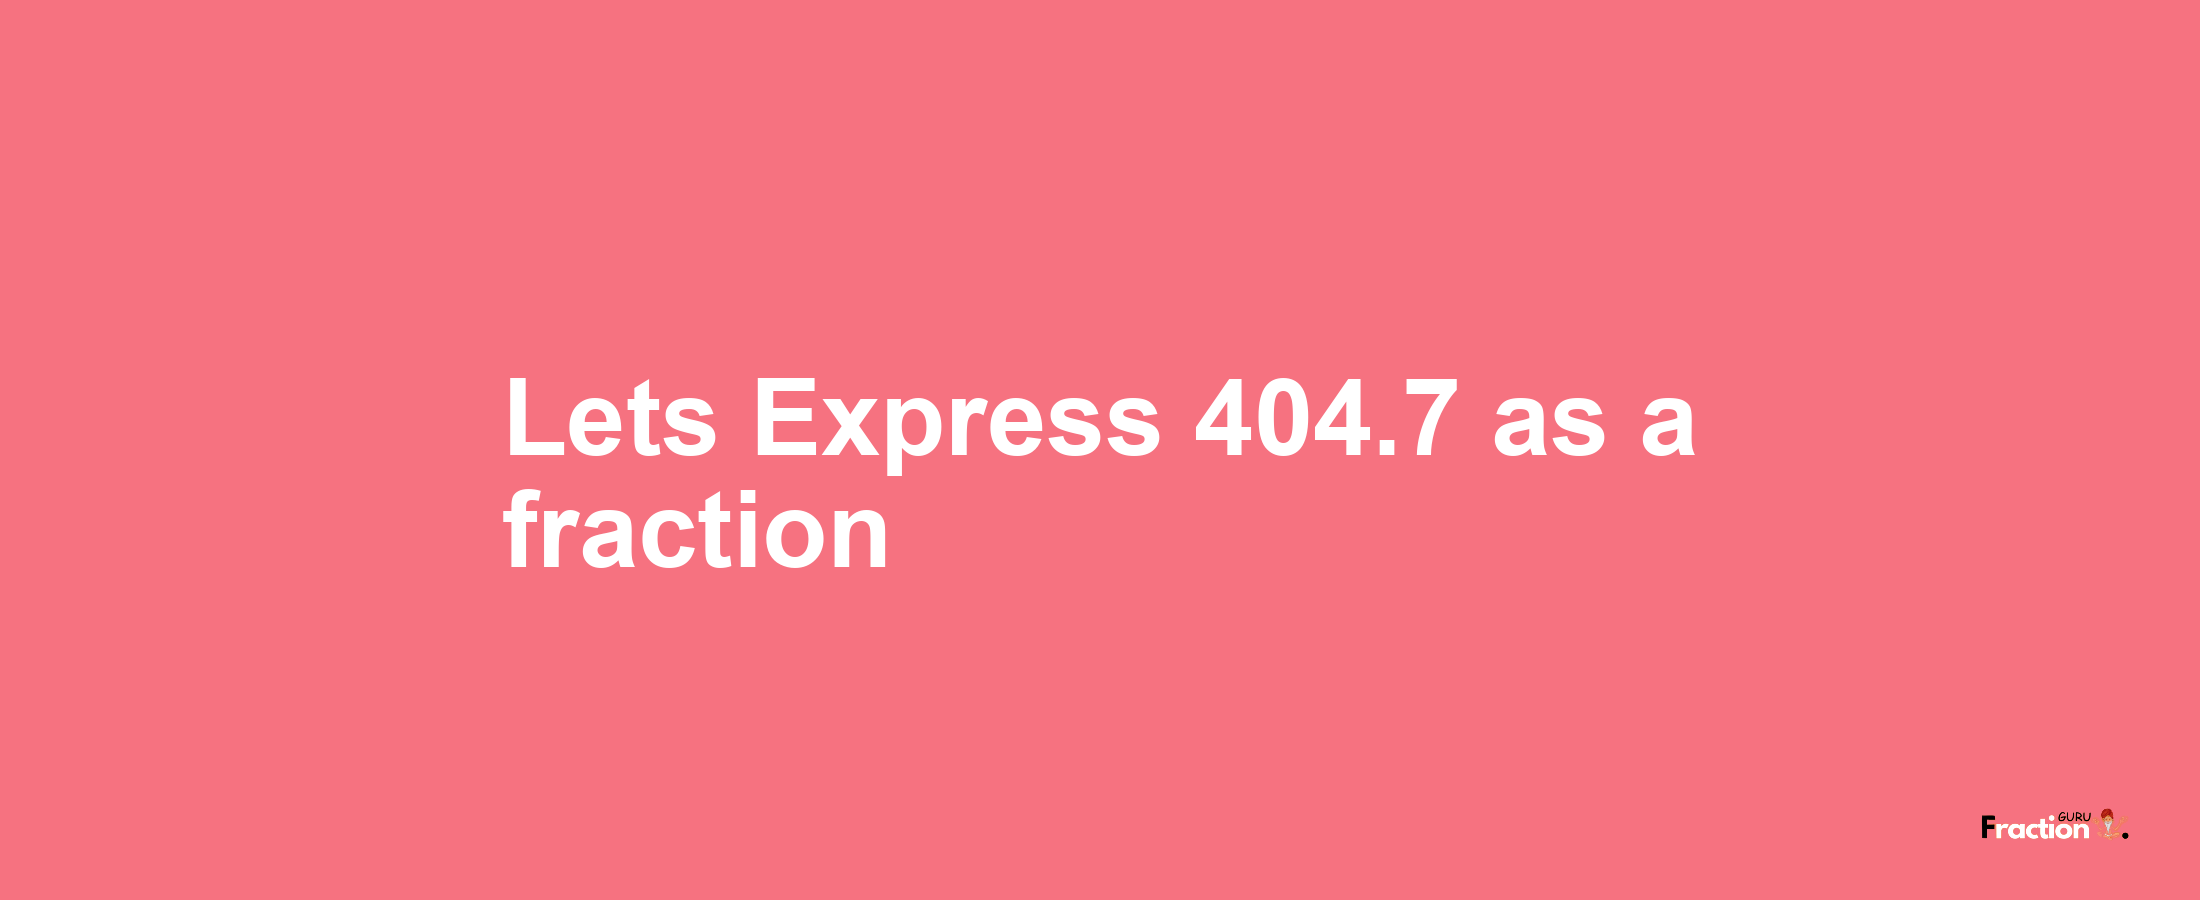 Lets Express 404.7 as afraction